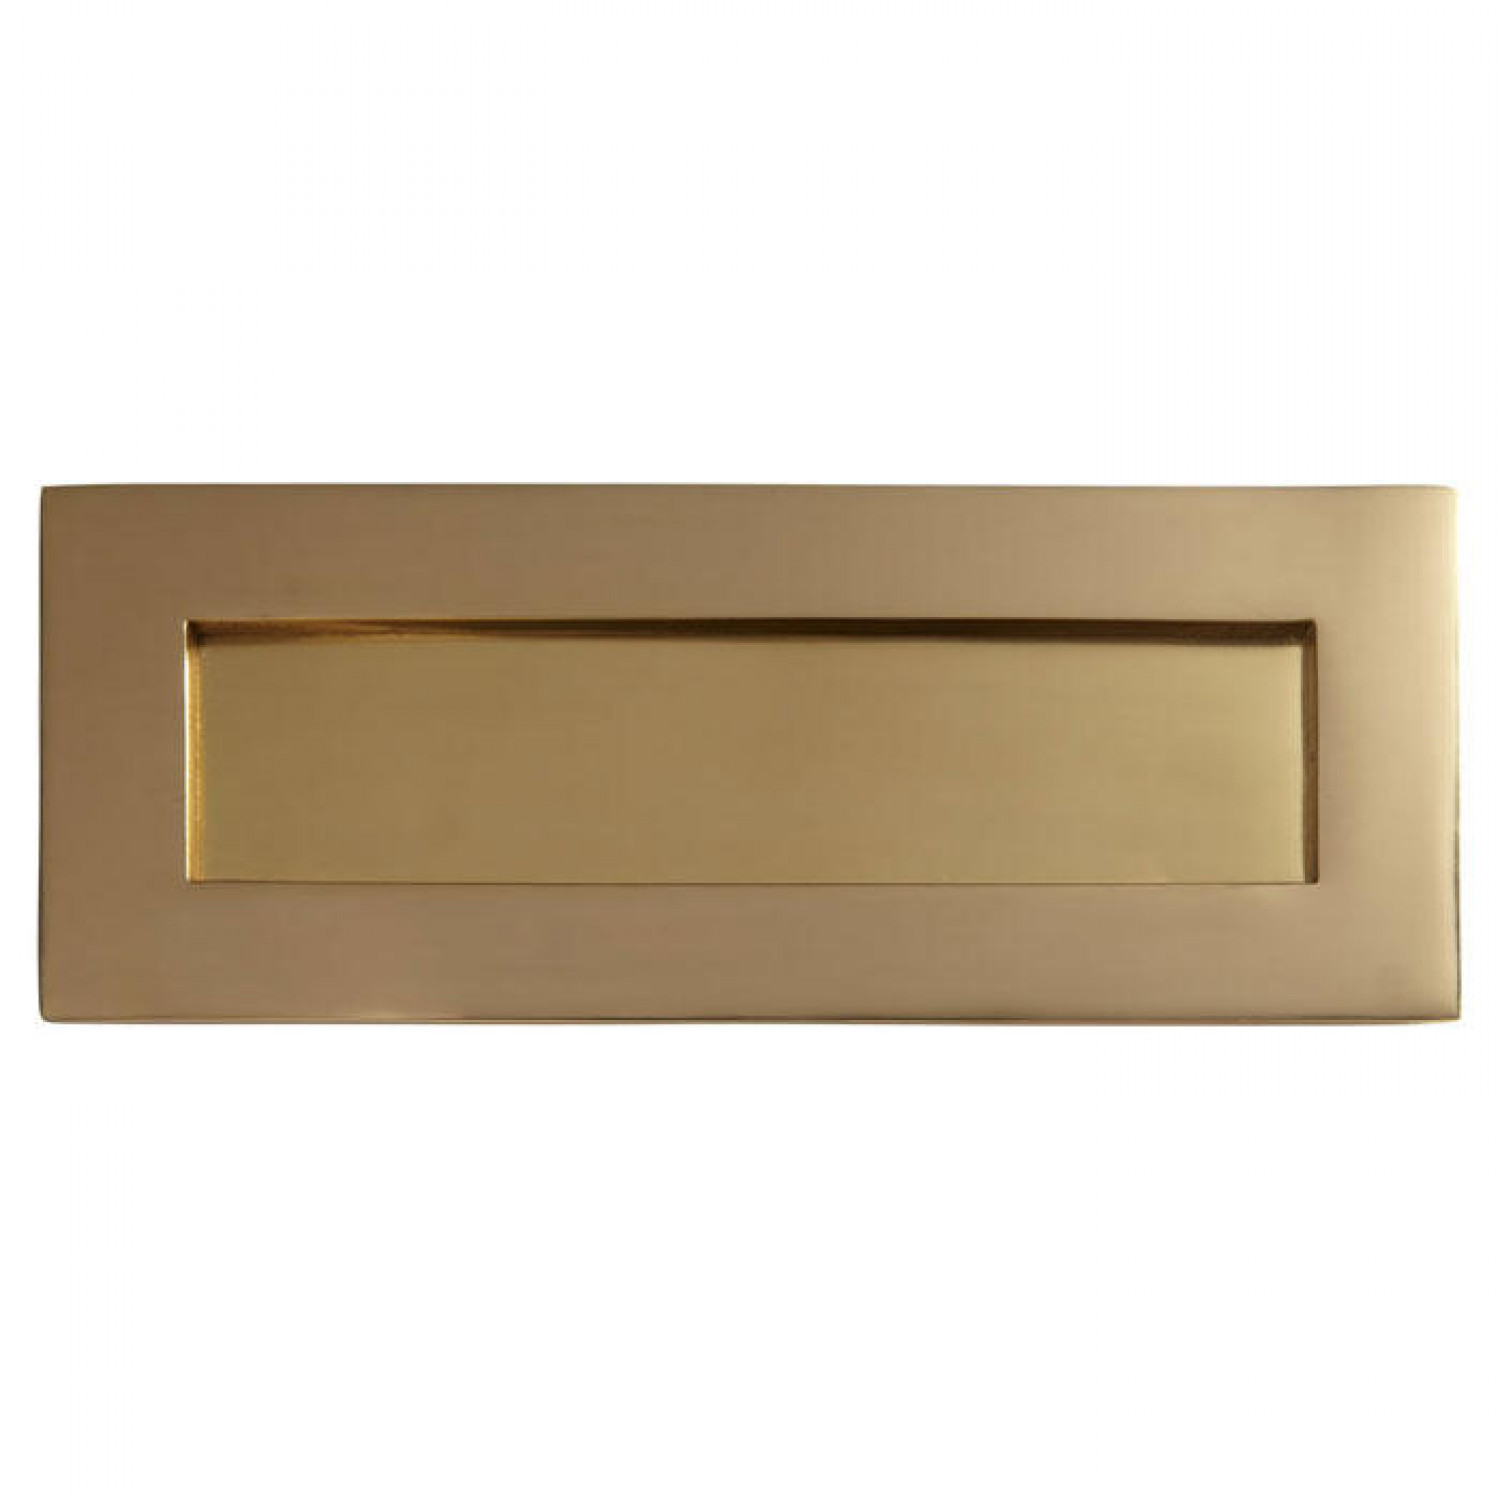 Large mail slot for door lock